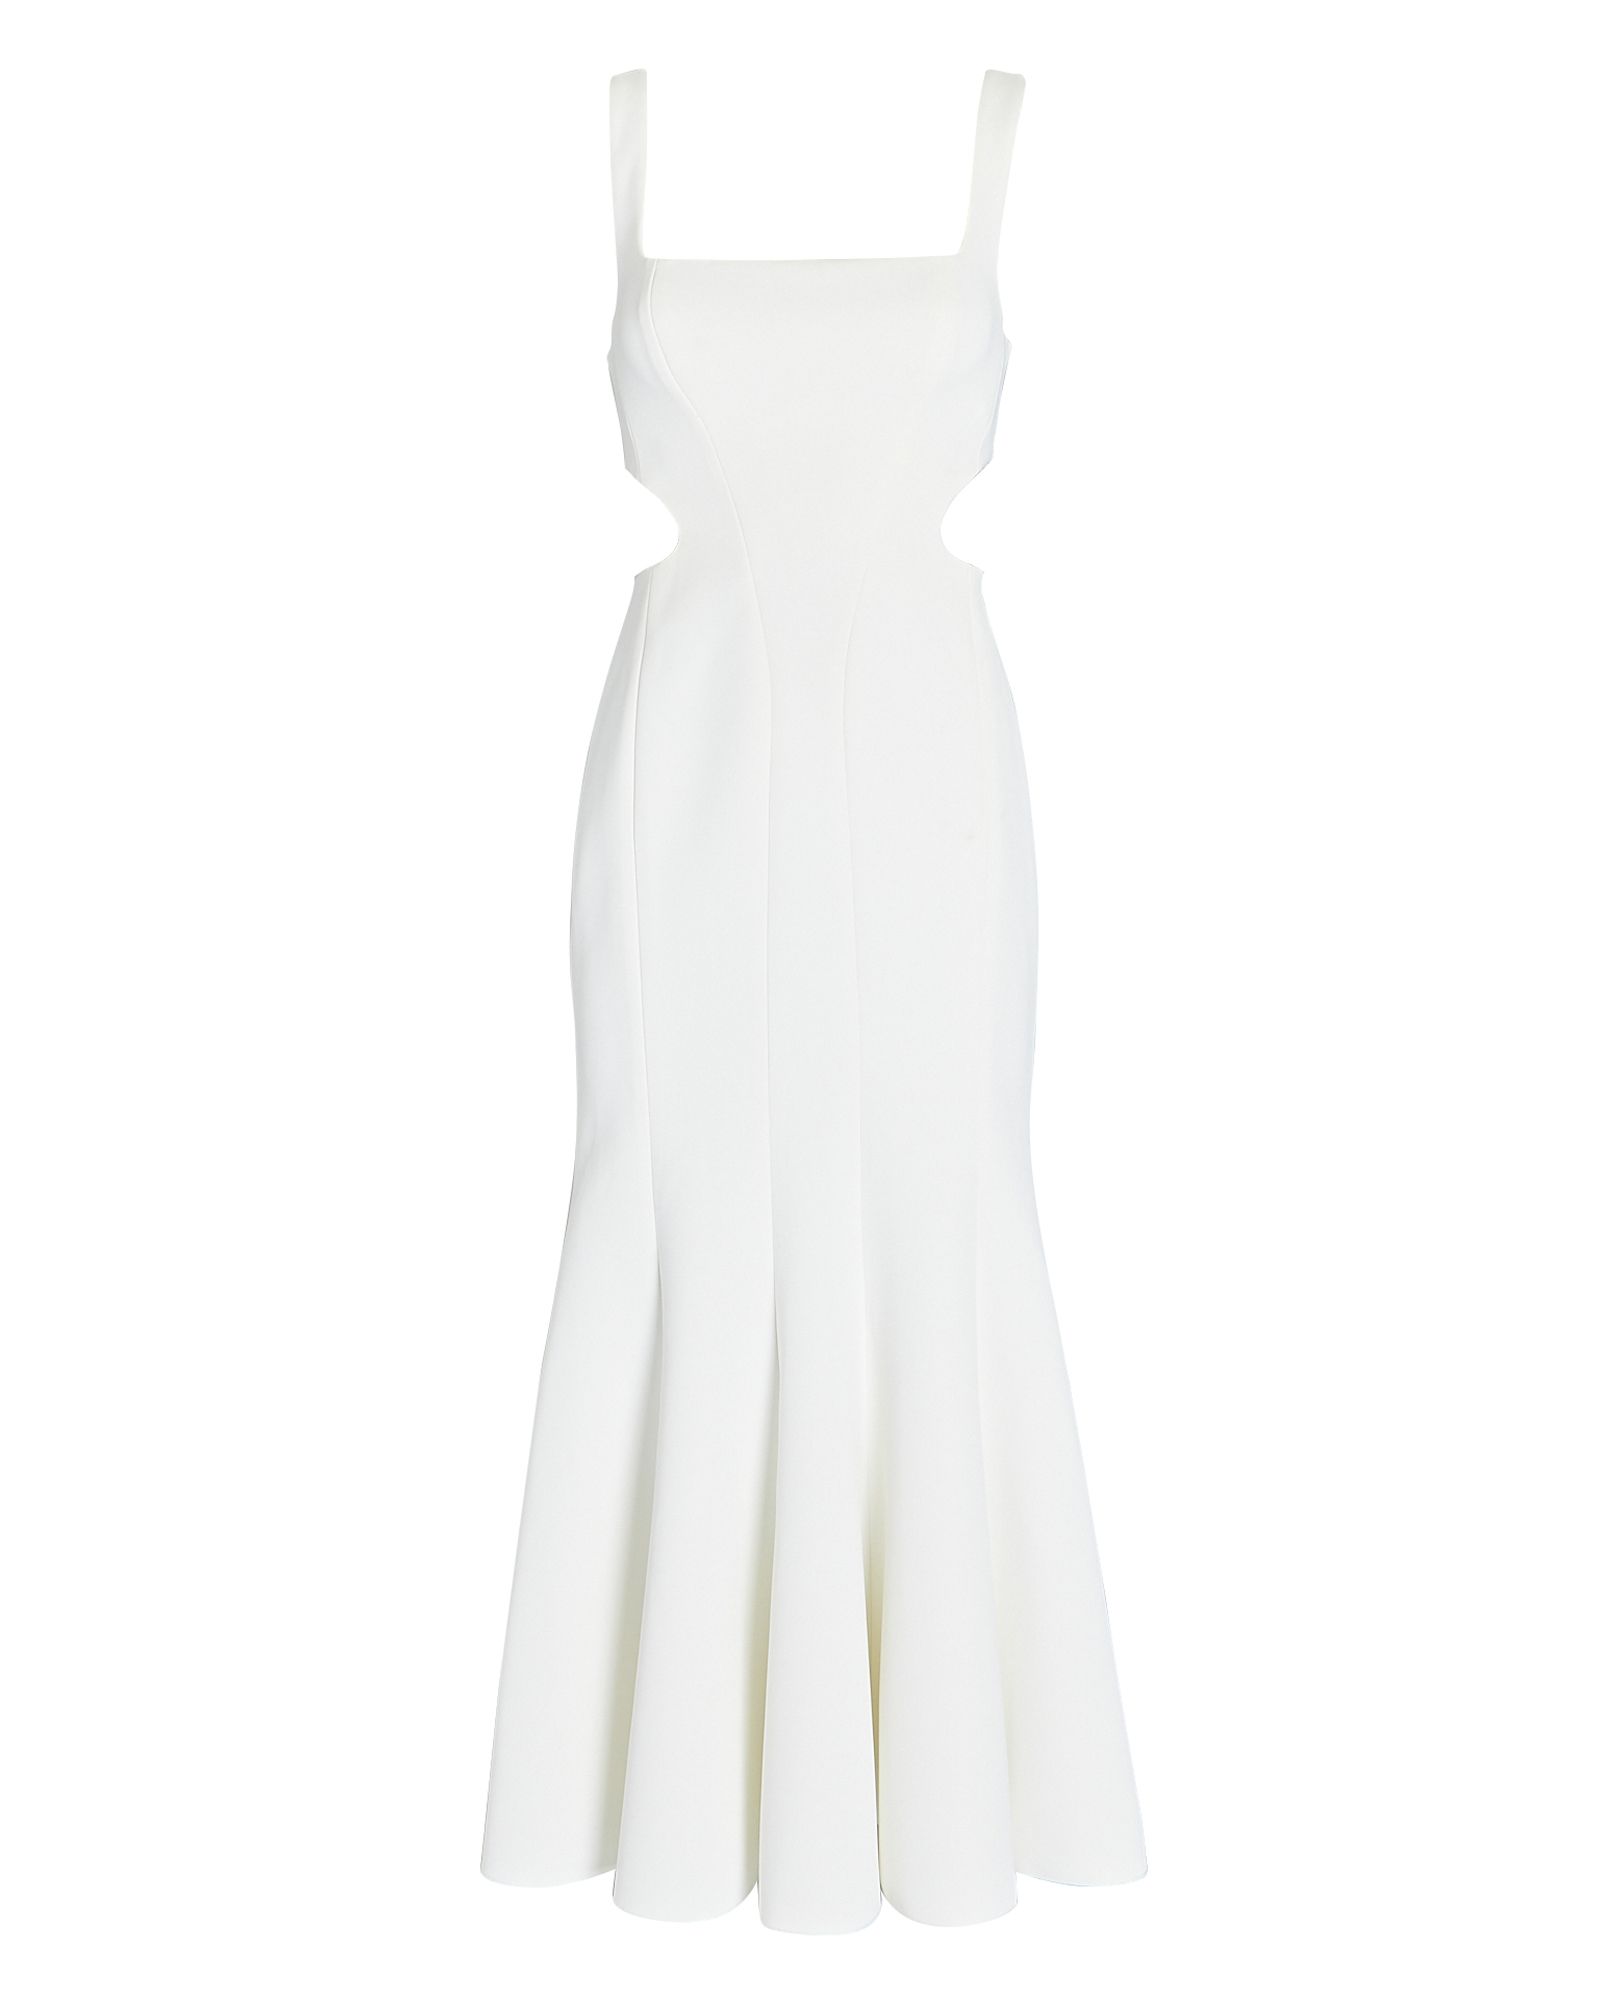 Paracombe Cut-Out Fluted Midi Dress | INTERMIX